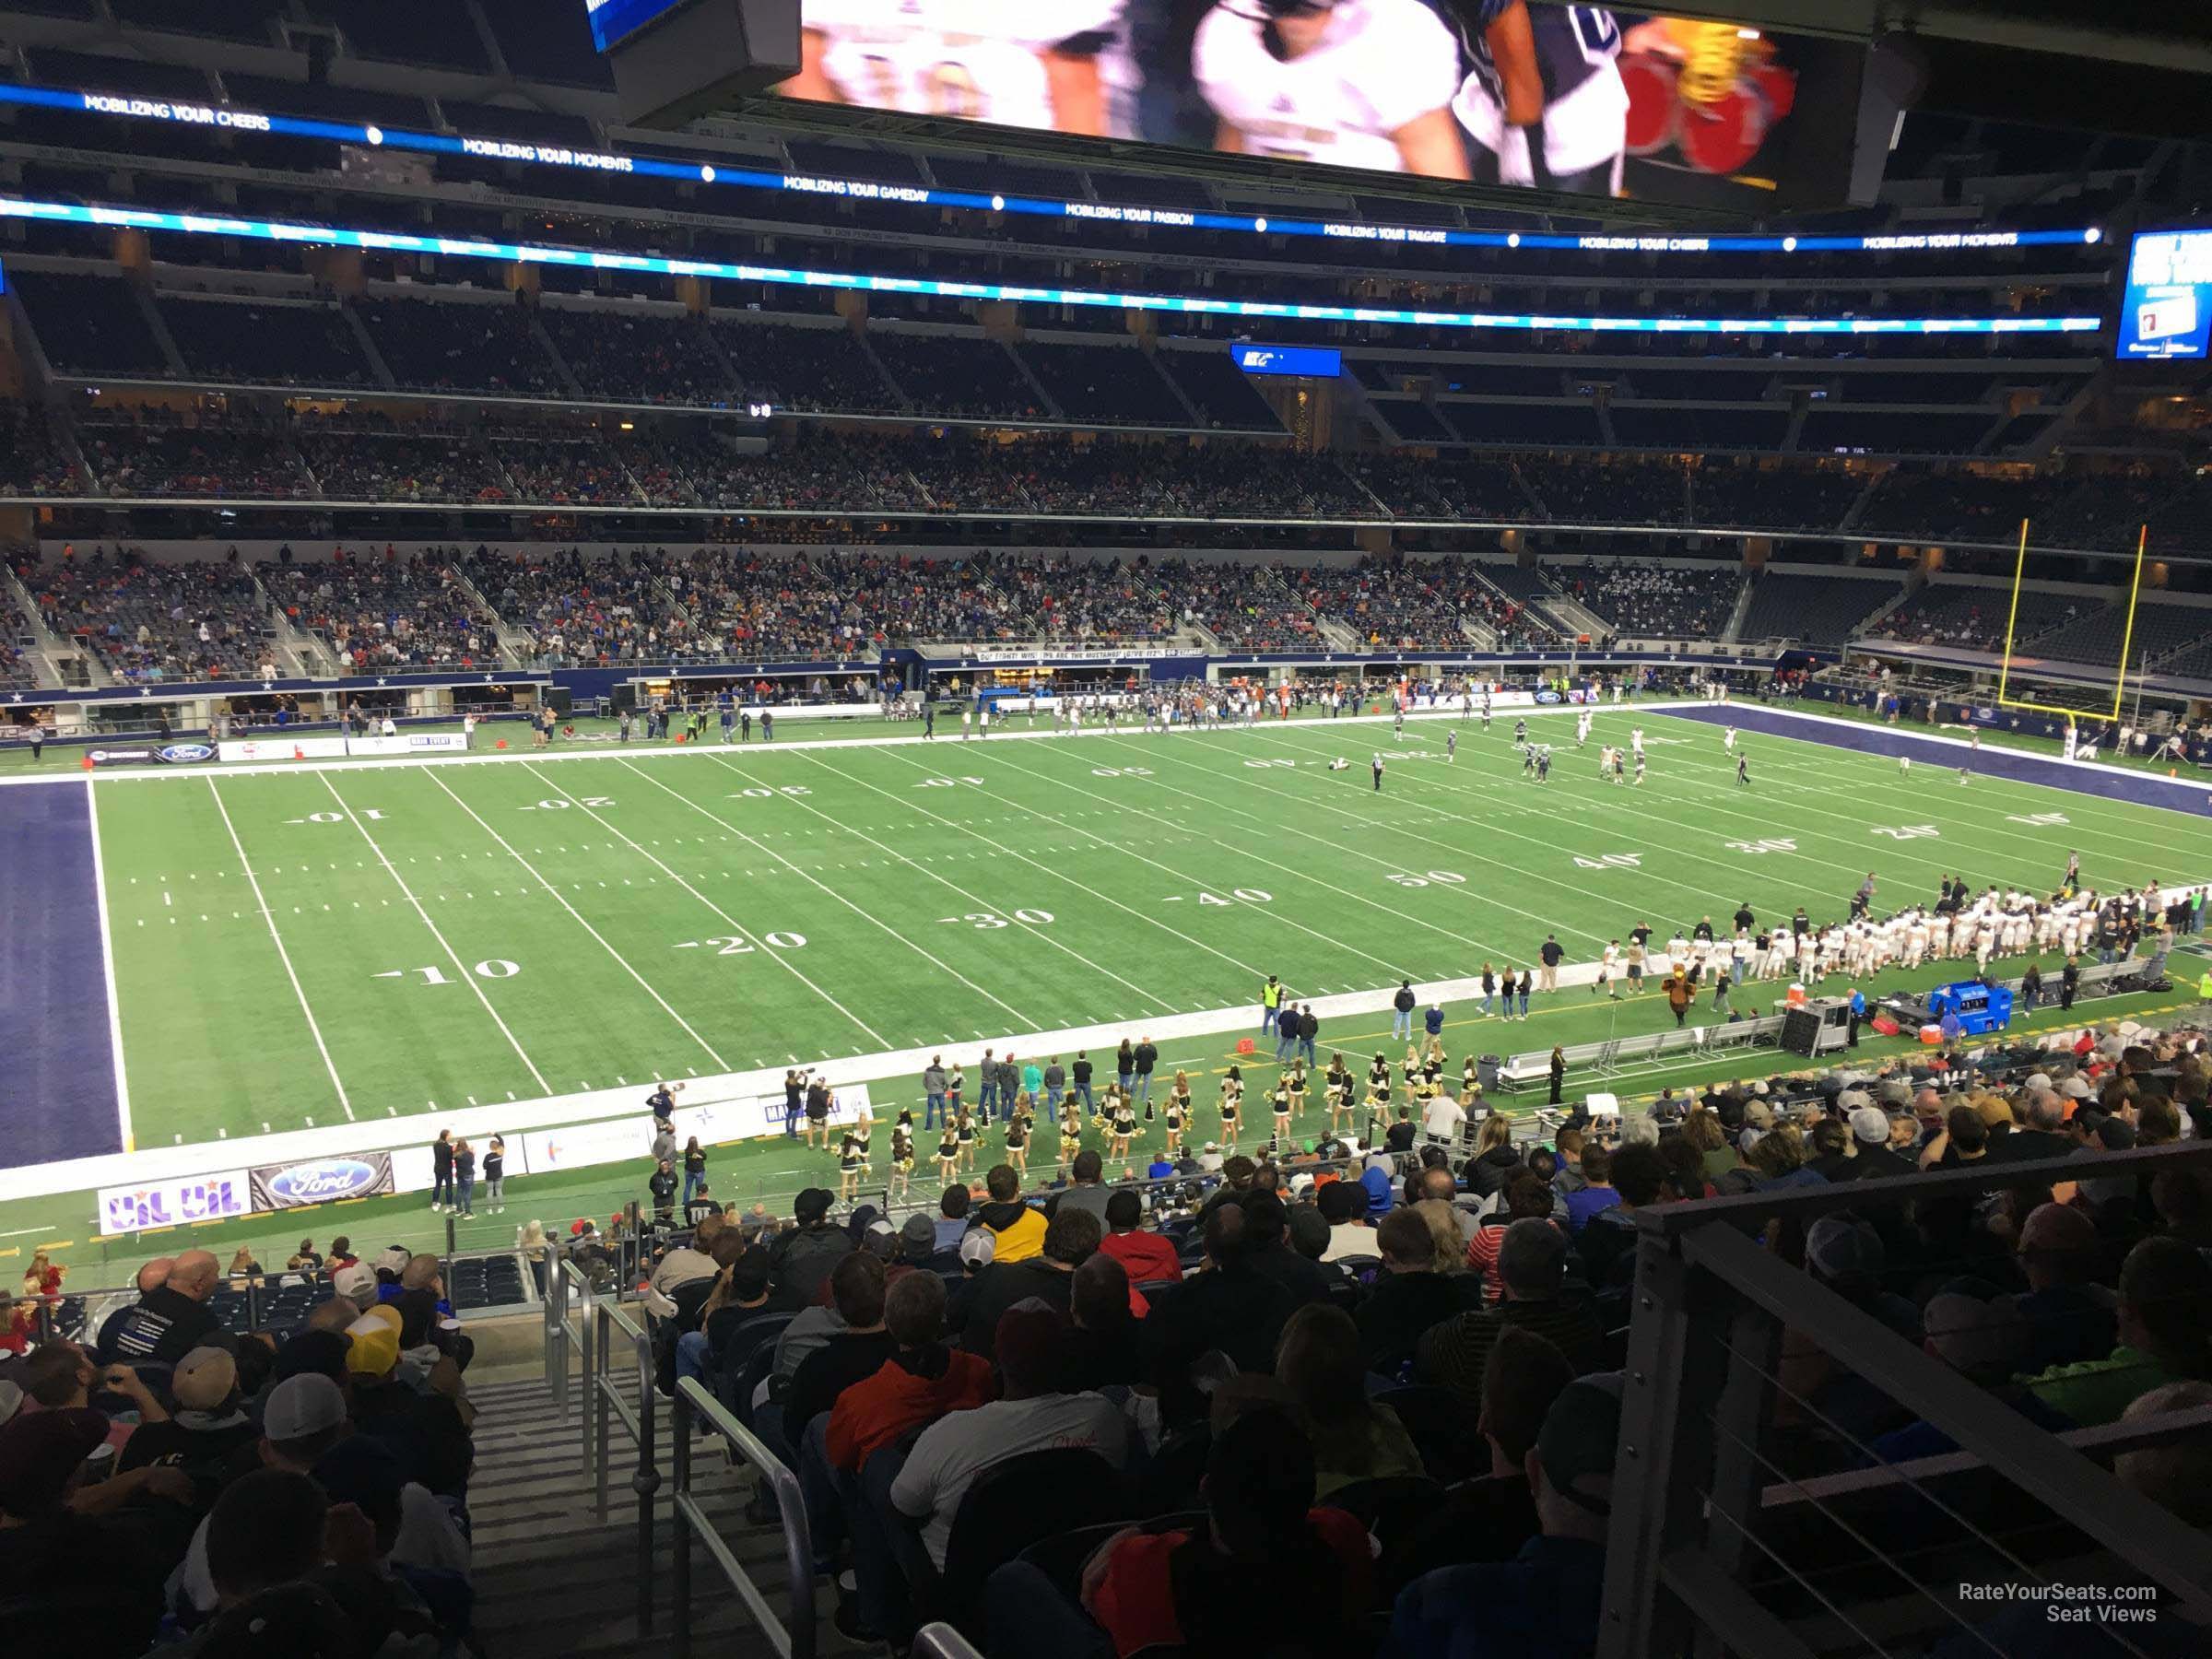 section c239, row 14 seat view  for football - at&t stadium (cowboys stadium)